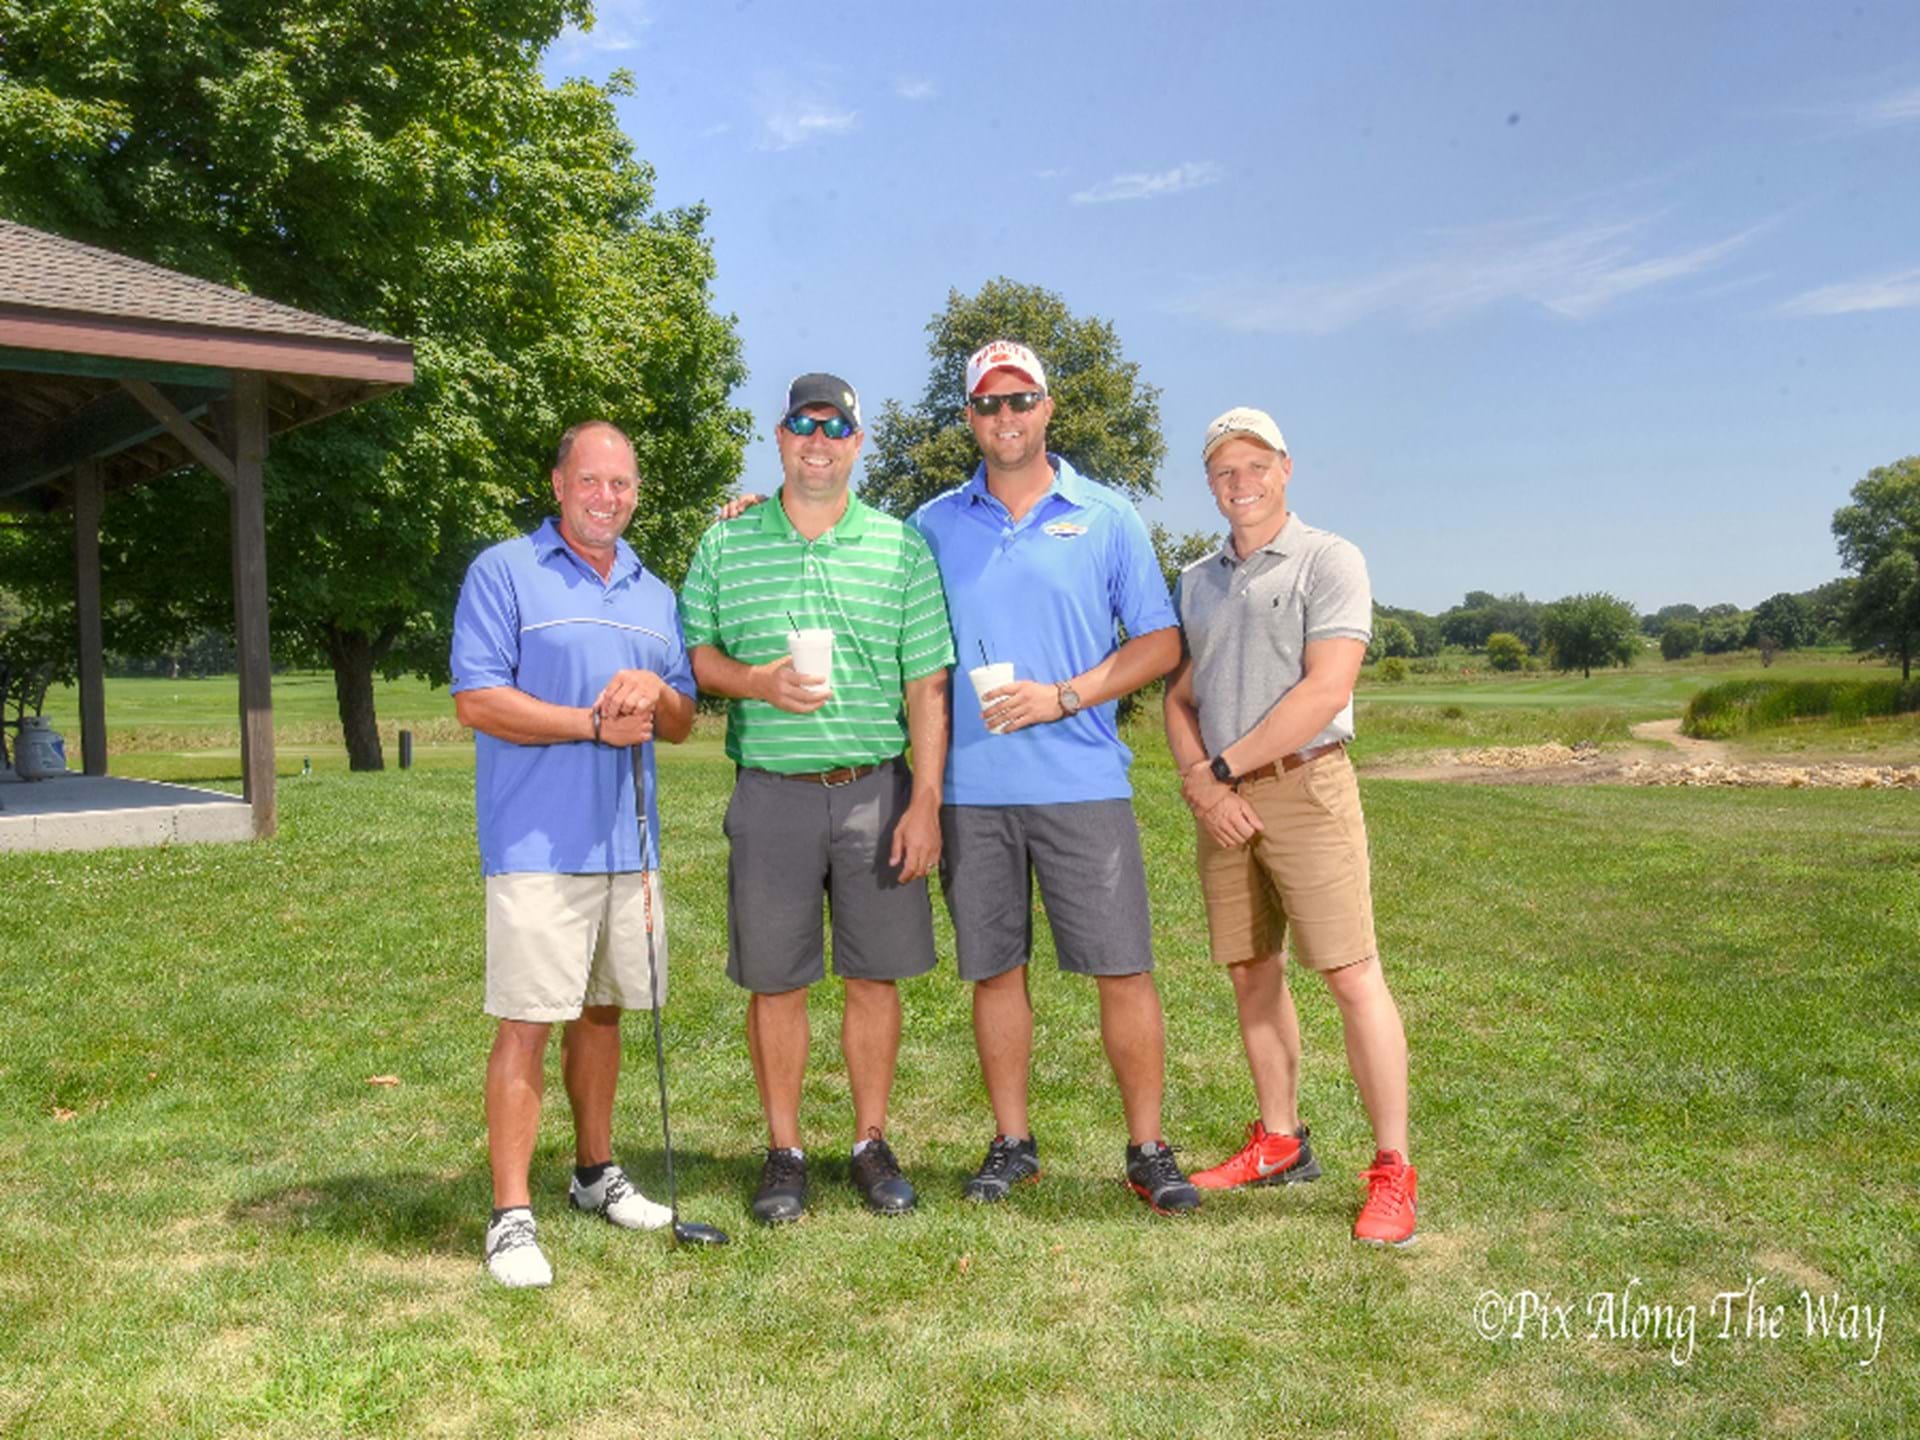 Valley Oaks Golf Course team. Photo by Pix Along the Way